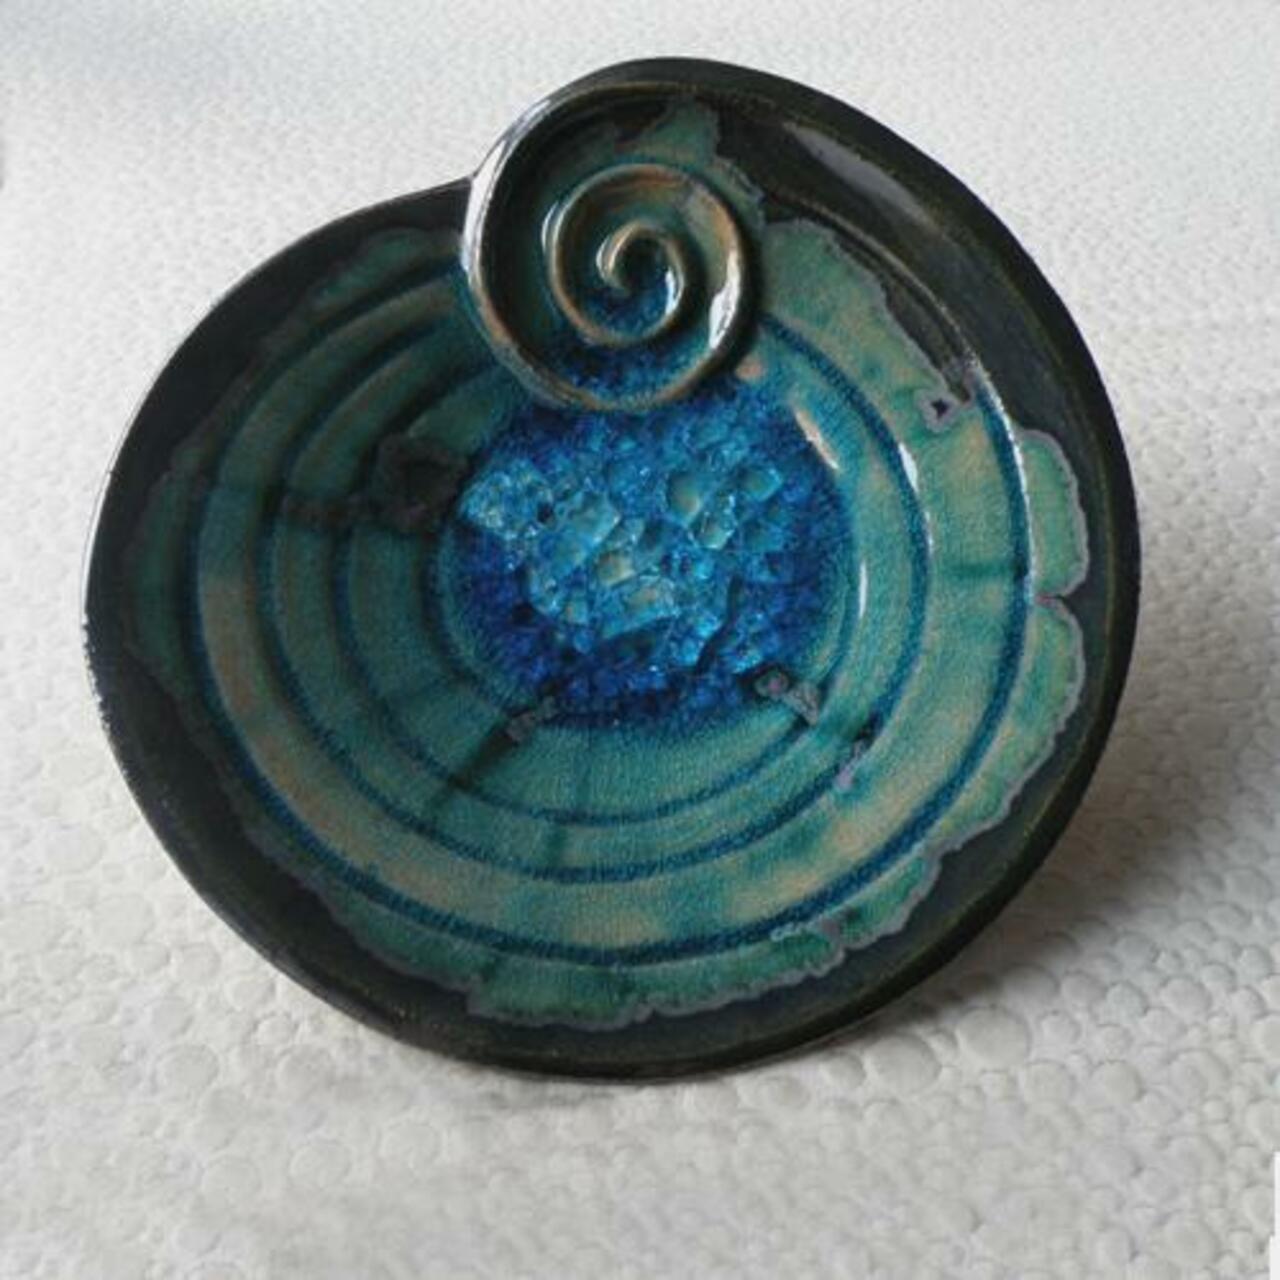 #ceramics #decor #interiors #CLAY #handmade #unique #beautiful #awsome #followus #home
http://uniqueandhandmade.co.uk/products/lake-shaped-blue-round-platter http://t.co/Wfqwk0hbMy